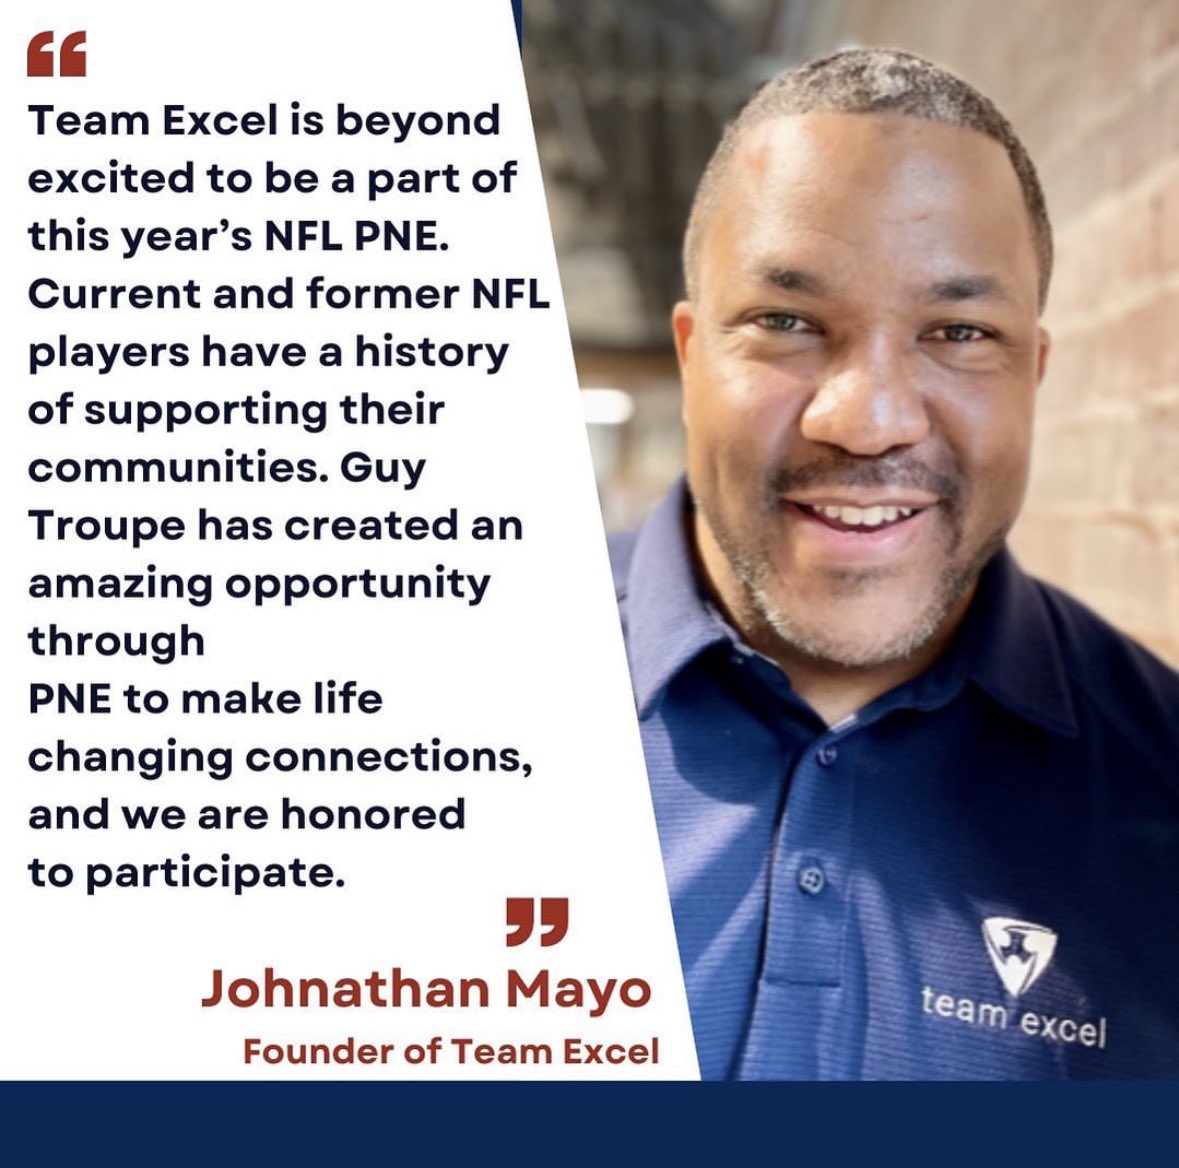 Thrilled to have @GoTeamExcel as one of our event vendors and sponsors 🎉 #NFL #Playernetworking #communityrelations